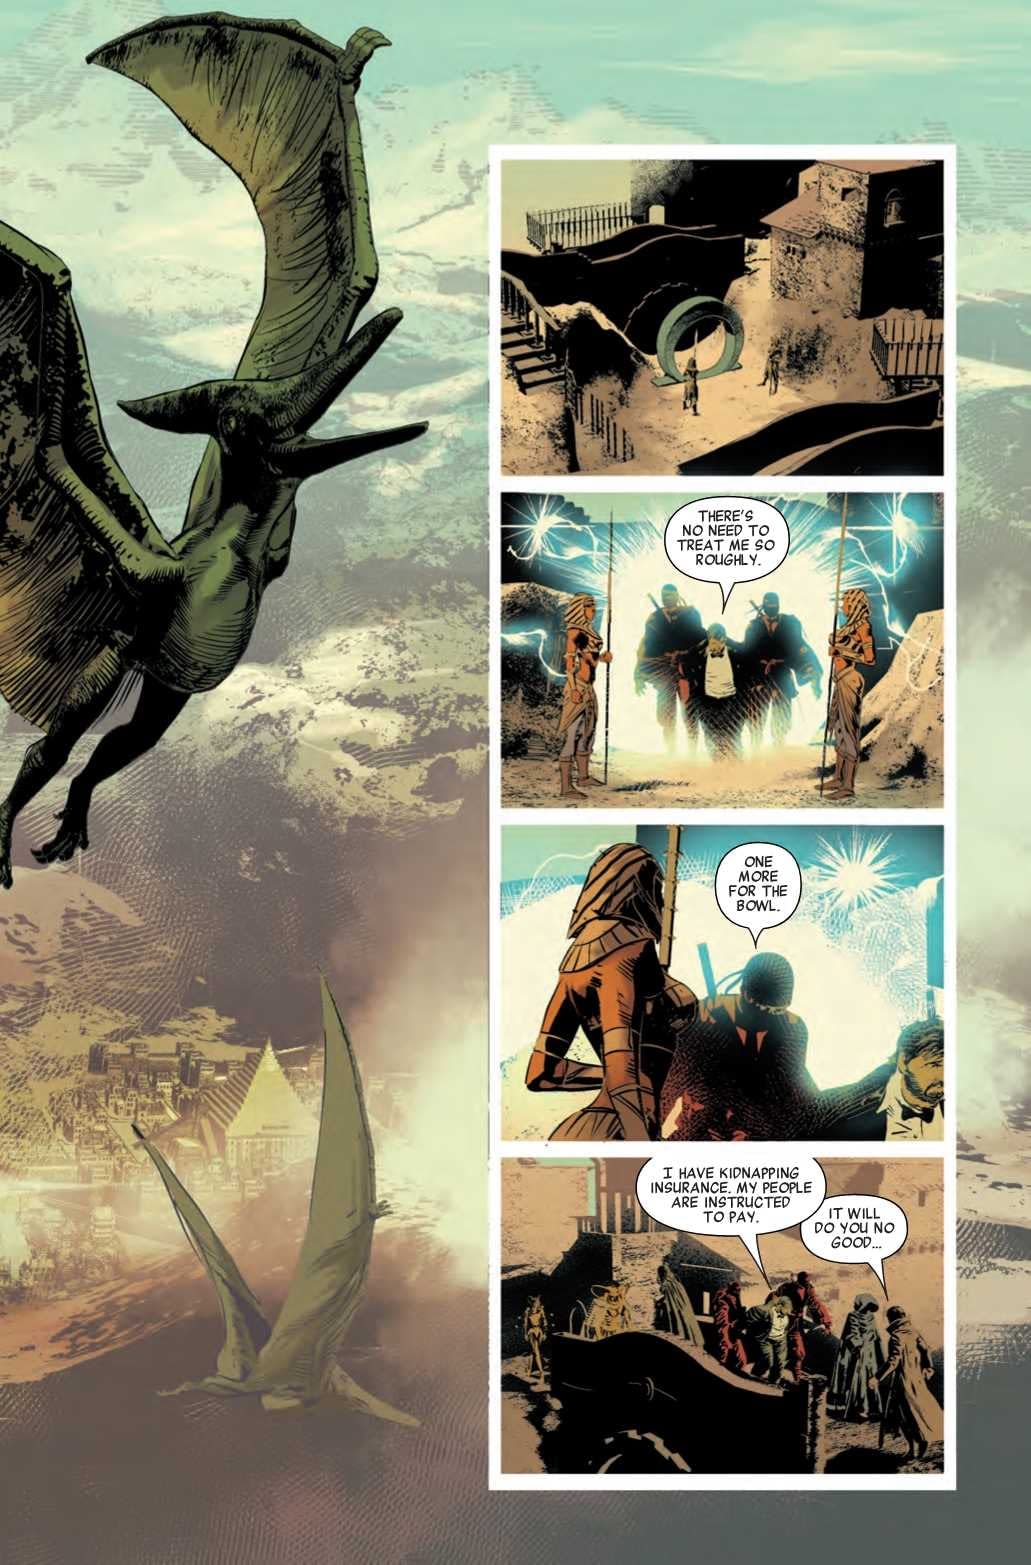 Criticism Gets Extreme in Savage Avengers #1 (Preview)